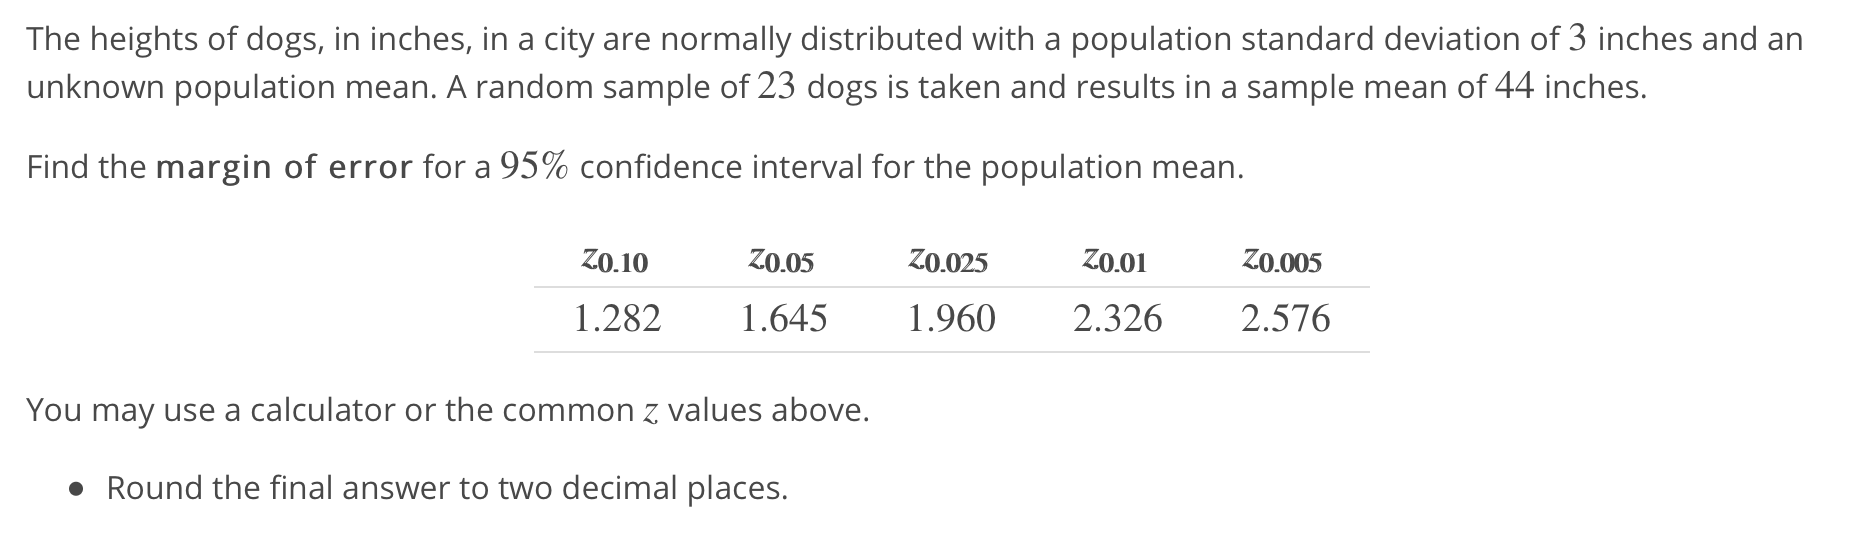 The heights of dogs, in inches, in a city are normally distributed with a population standard deviation of 3 inches and an
unknown population mean. A random sample of 23 dogs is taken and results in a sample mean of 44 inches.
Find the margin of error for a 95% confidence interval for the population mean.
1.282 645 1.960 2.326 2.576
You may use a calculator or the common z values above.
Round the final answer to two decimal places.
